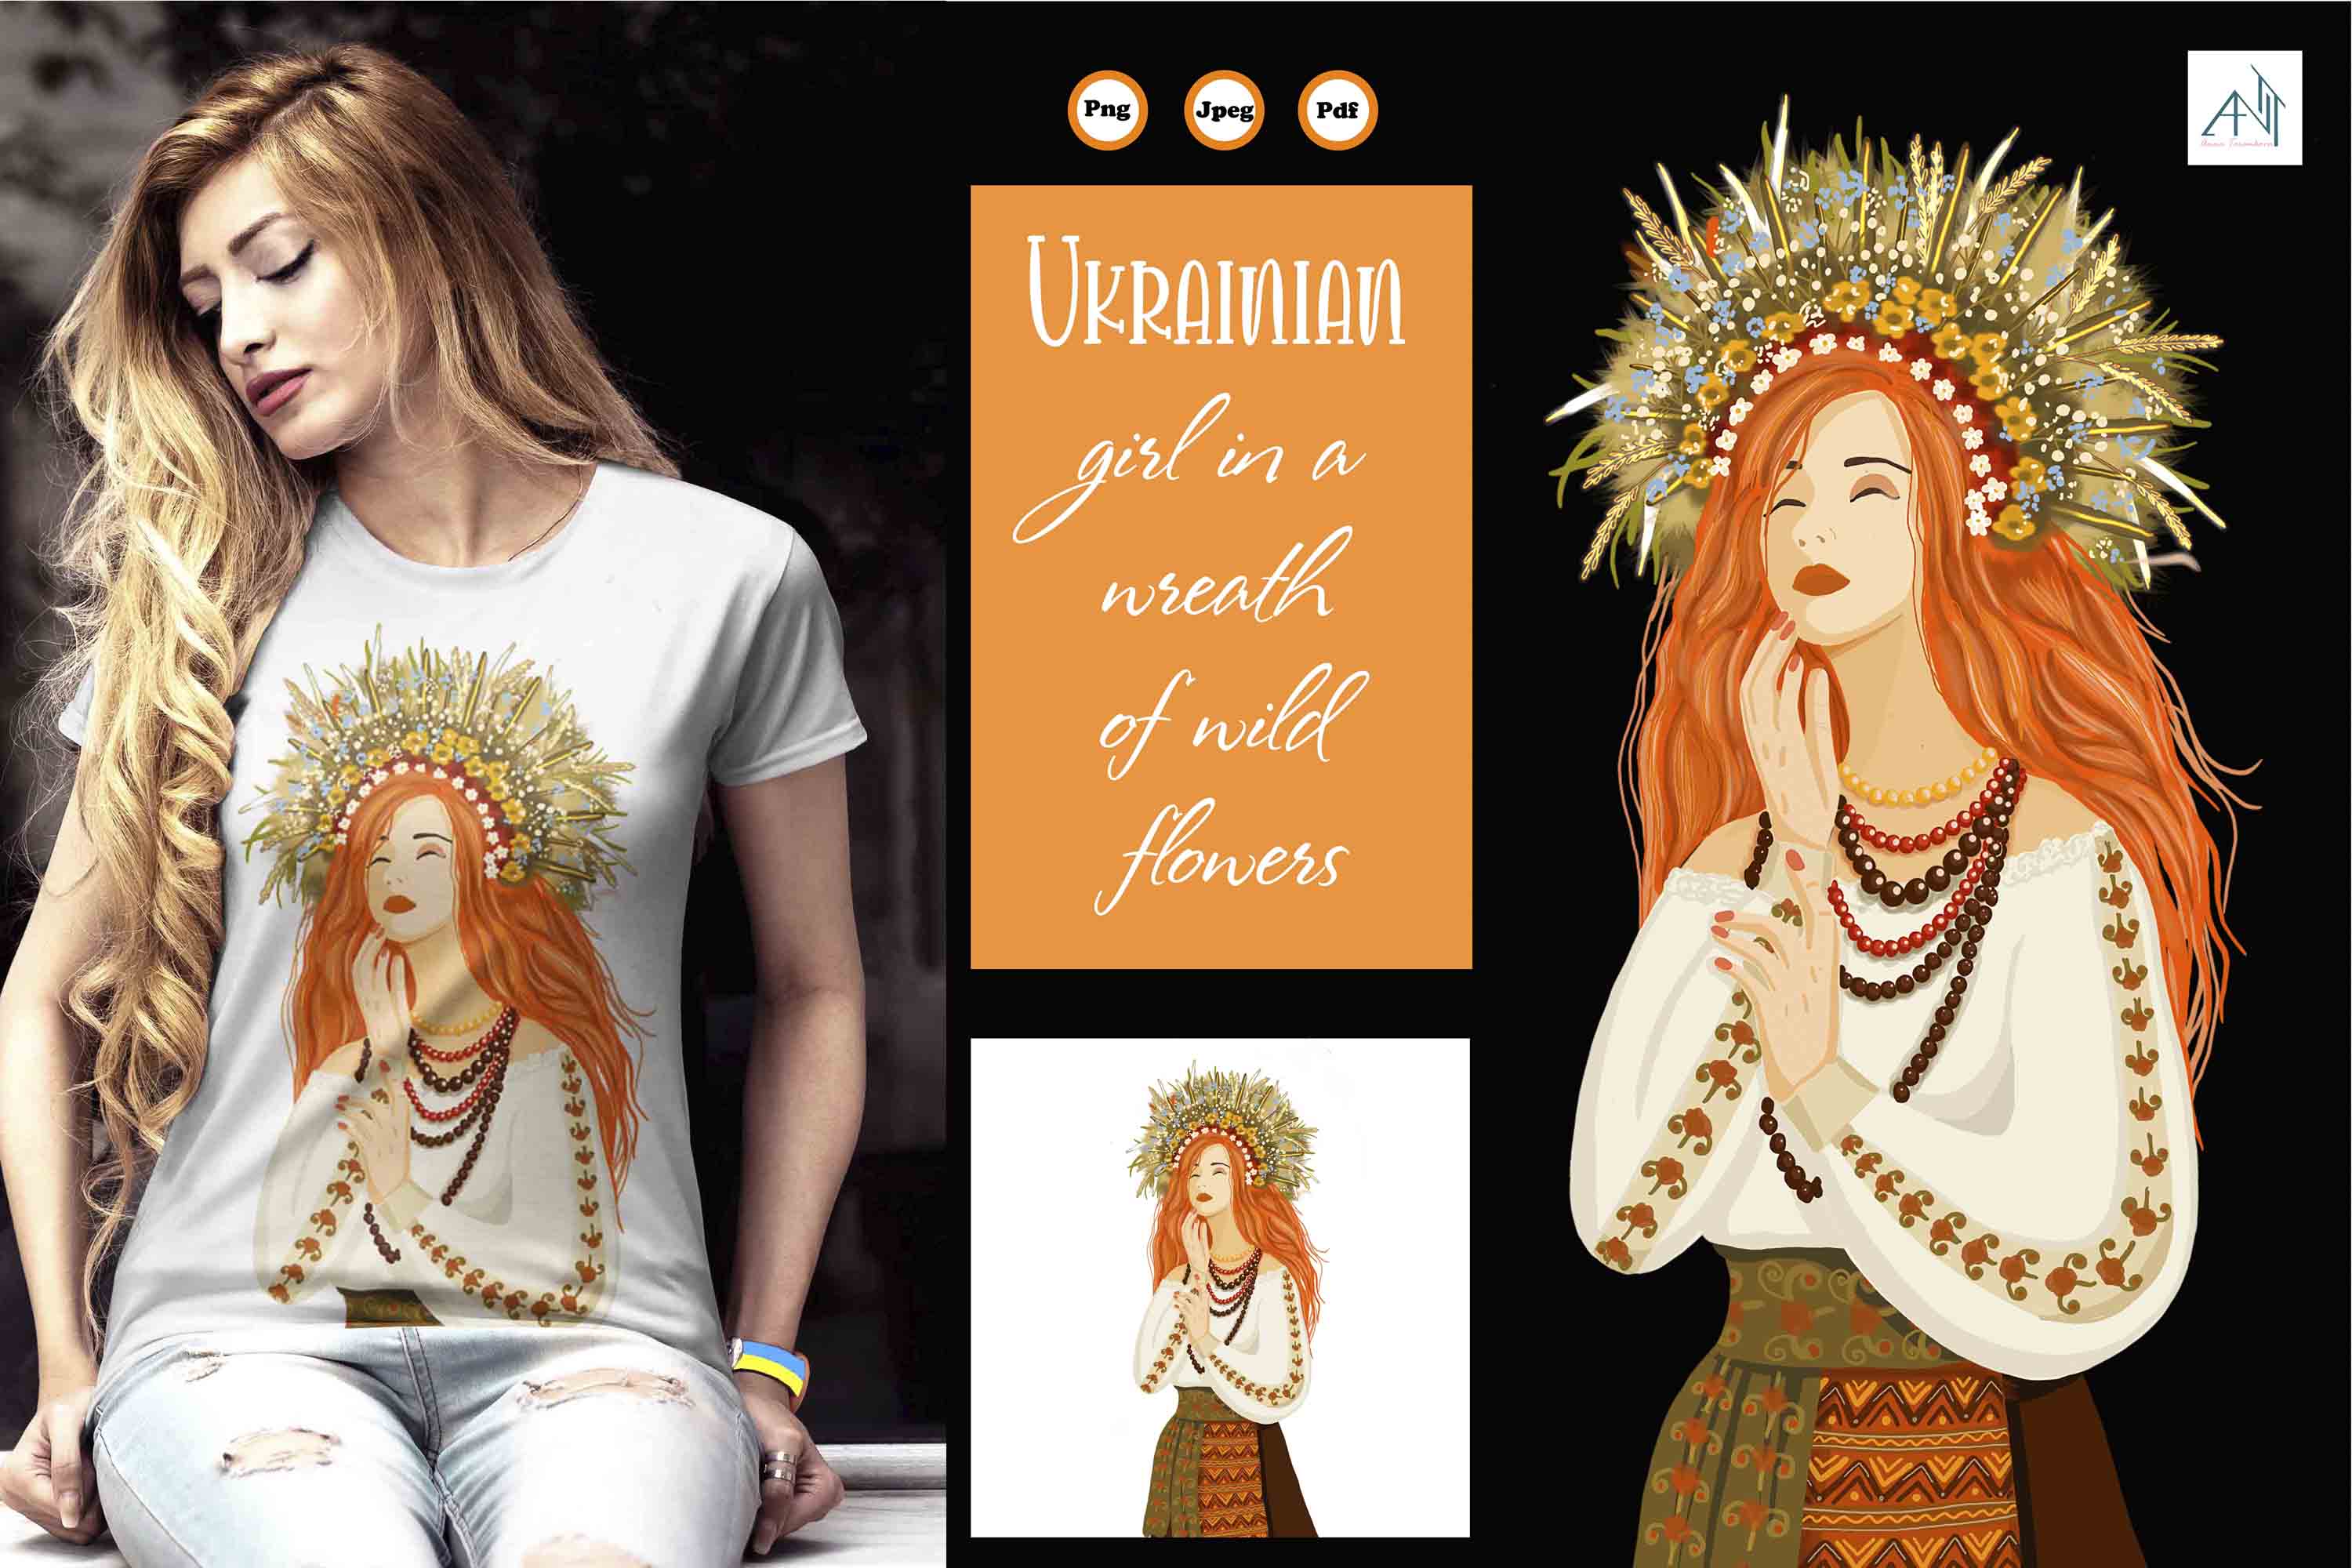 Hand drawn t-shirt. Ukrainian girl with a wreath of wild flowers facebook image.